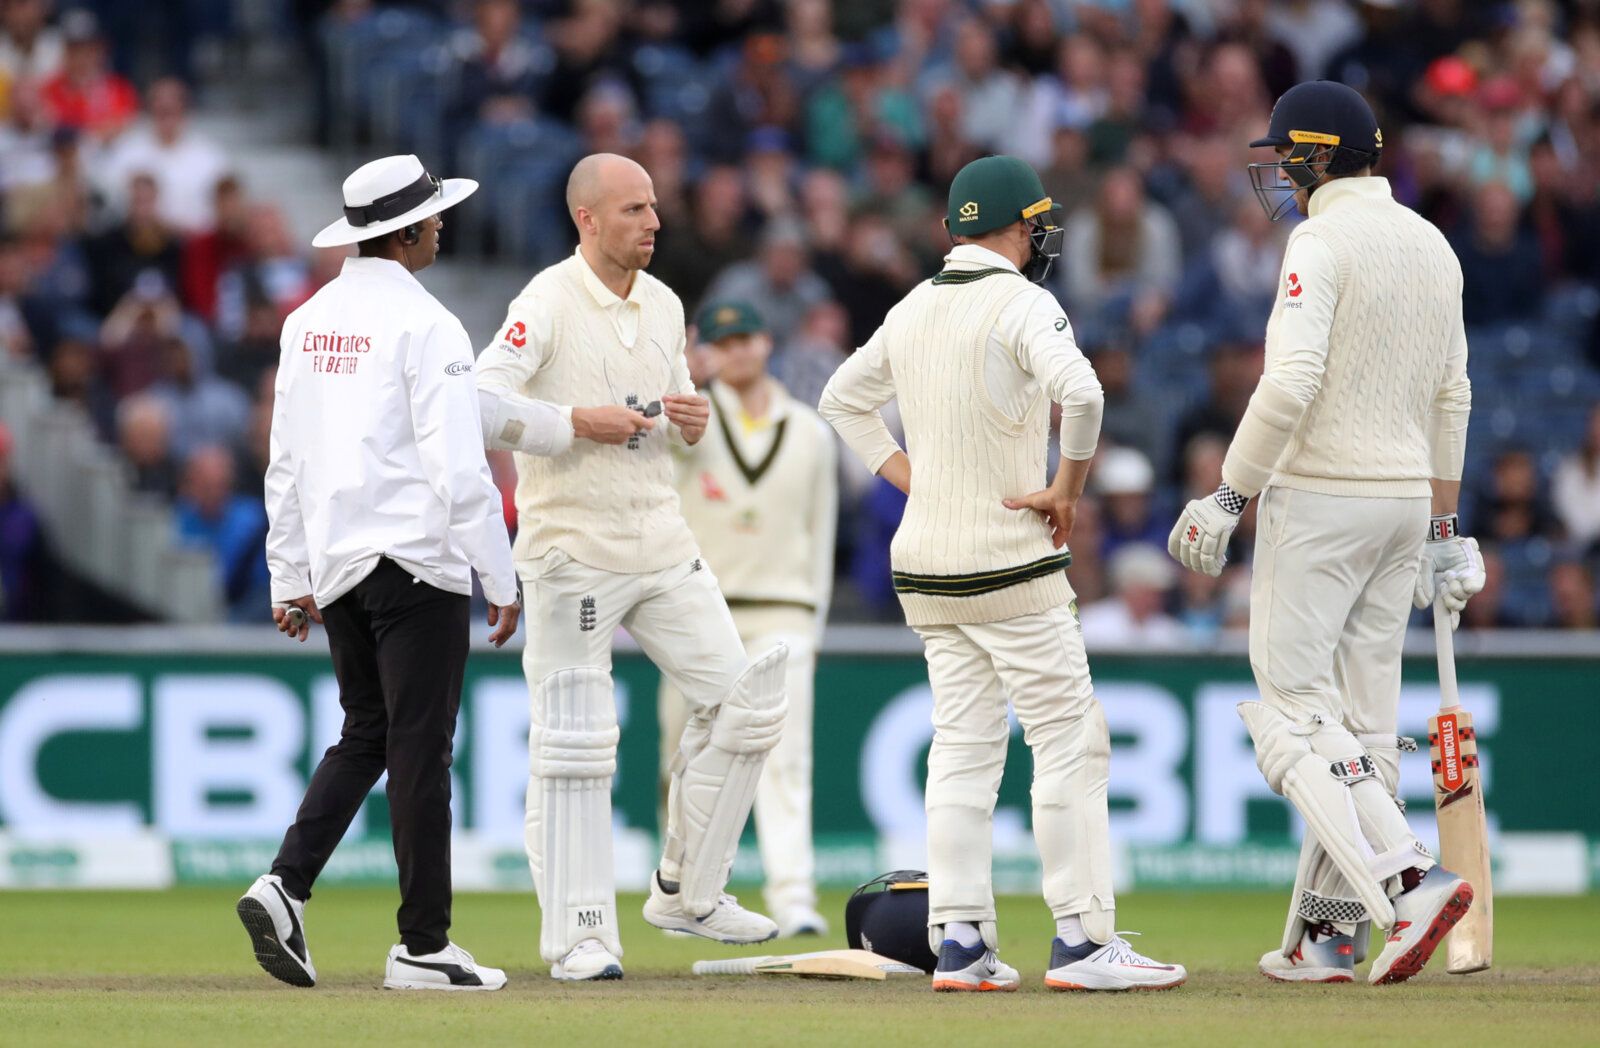 Cricket - Ashes 2019 - Fourth Test - England v Australia - Emirates Old Trafford, Manchester, Britain - September 8, 2019   England's Jack Leach cleans his glasses after the ball hit his helmet during the match    Action Images via Reuters/Carl Recine